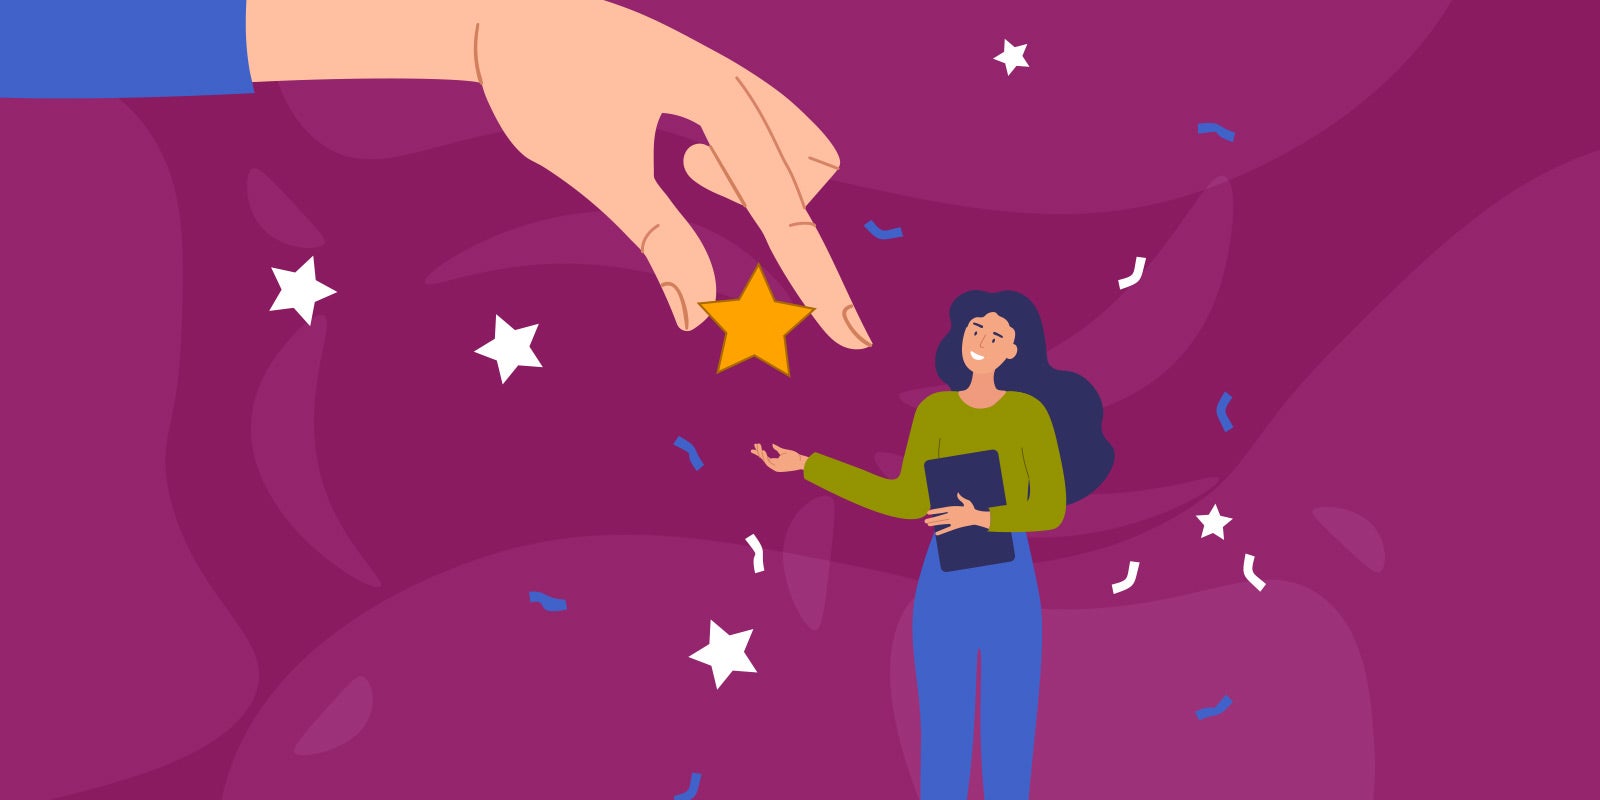 illustration of a giant hand giving a star to a woman business professional, a metaphor to show that this blog is about how to give effective feedback in the workplace